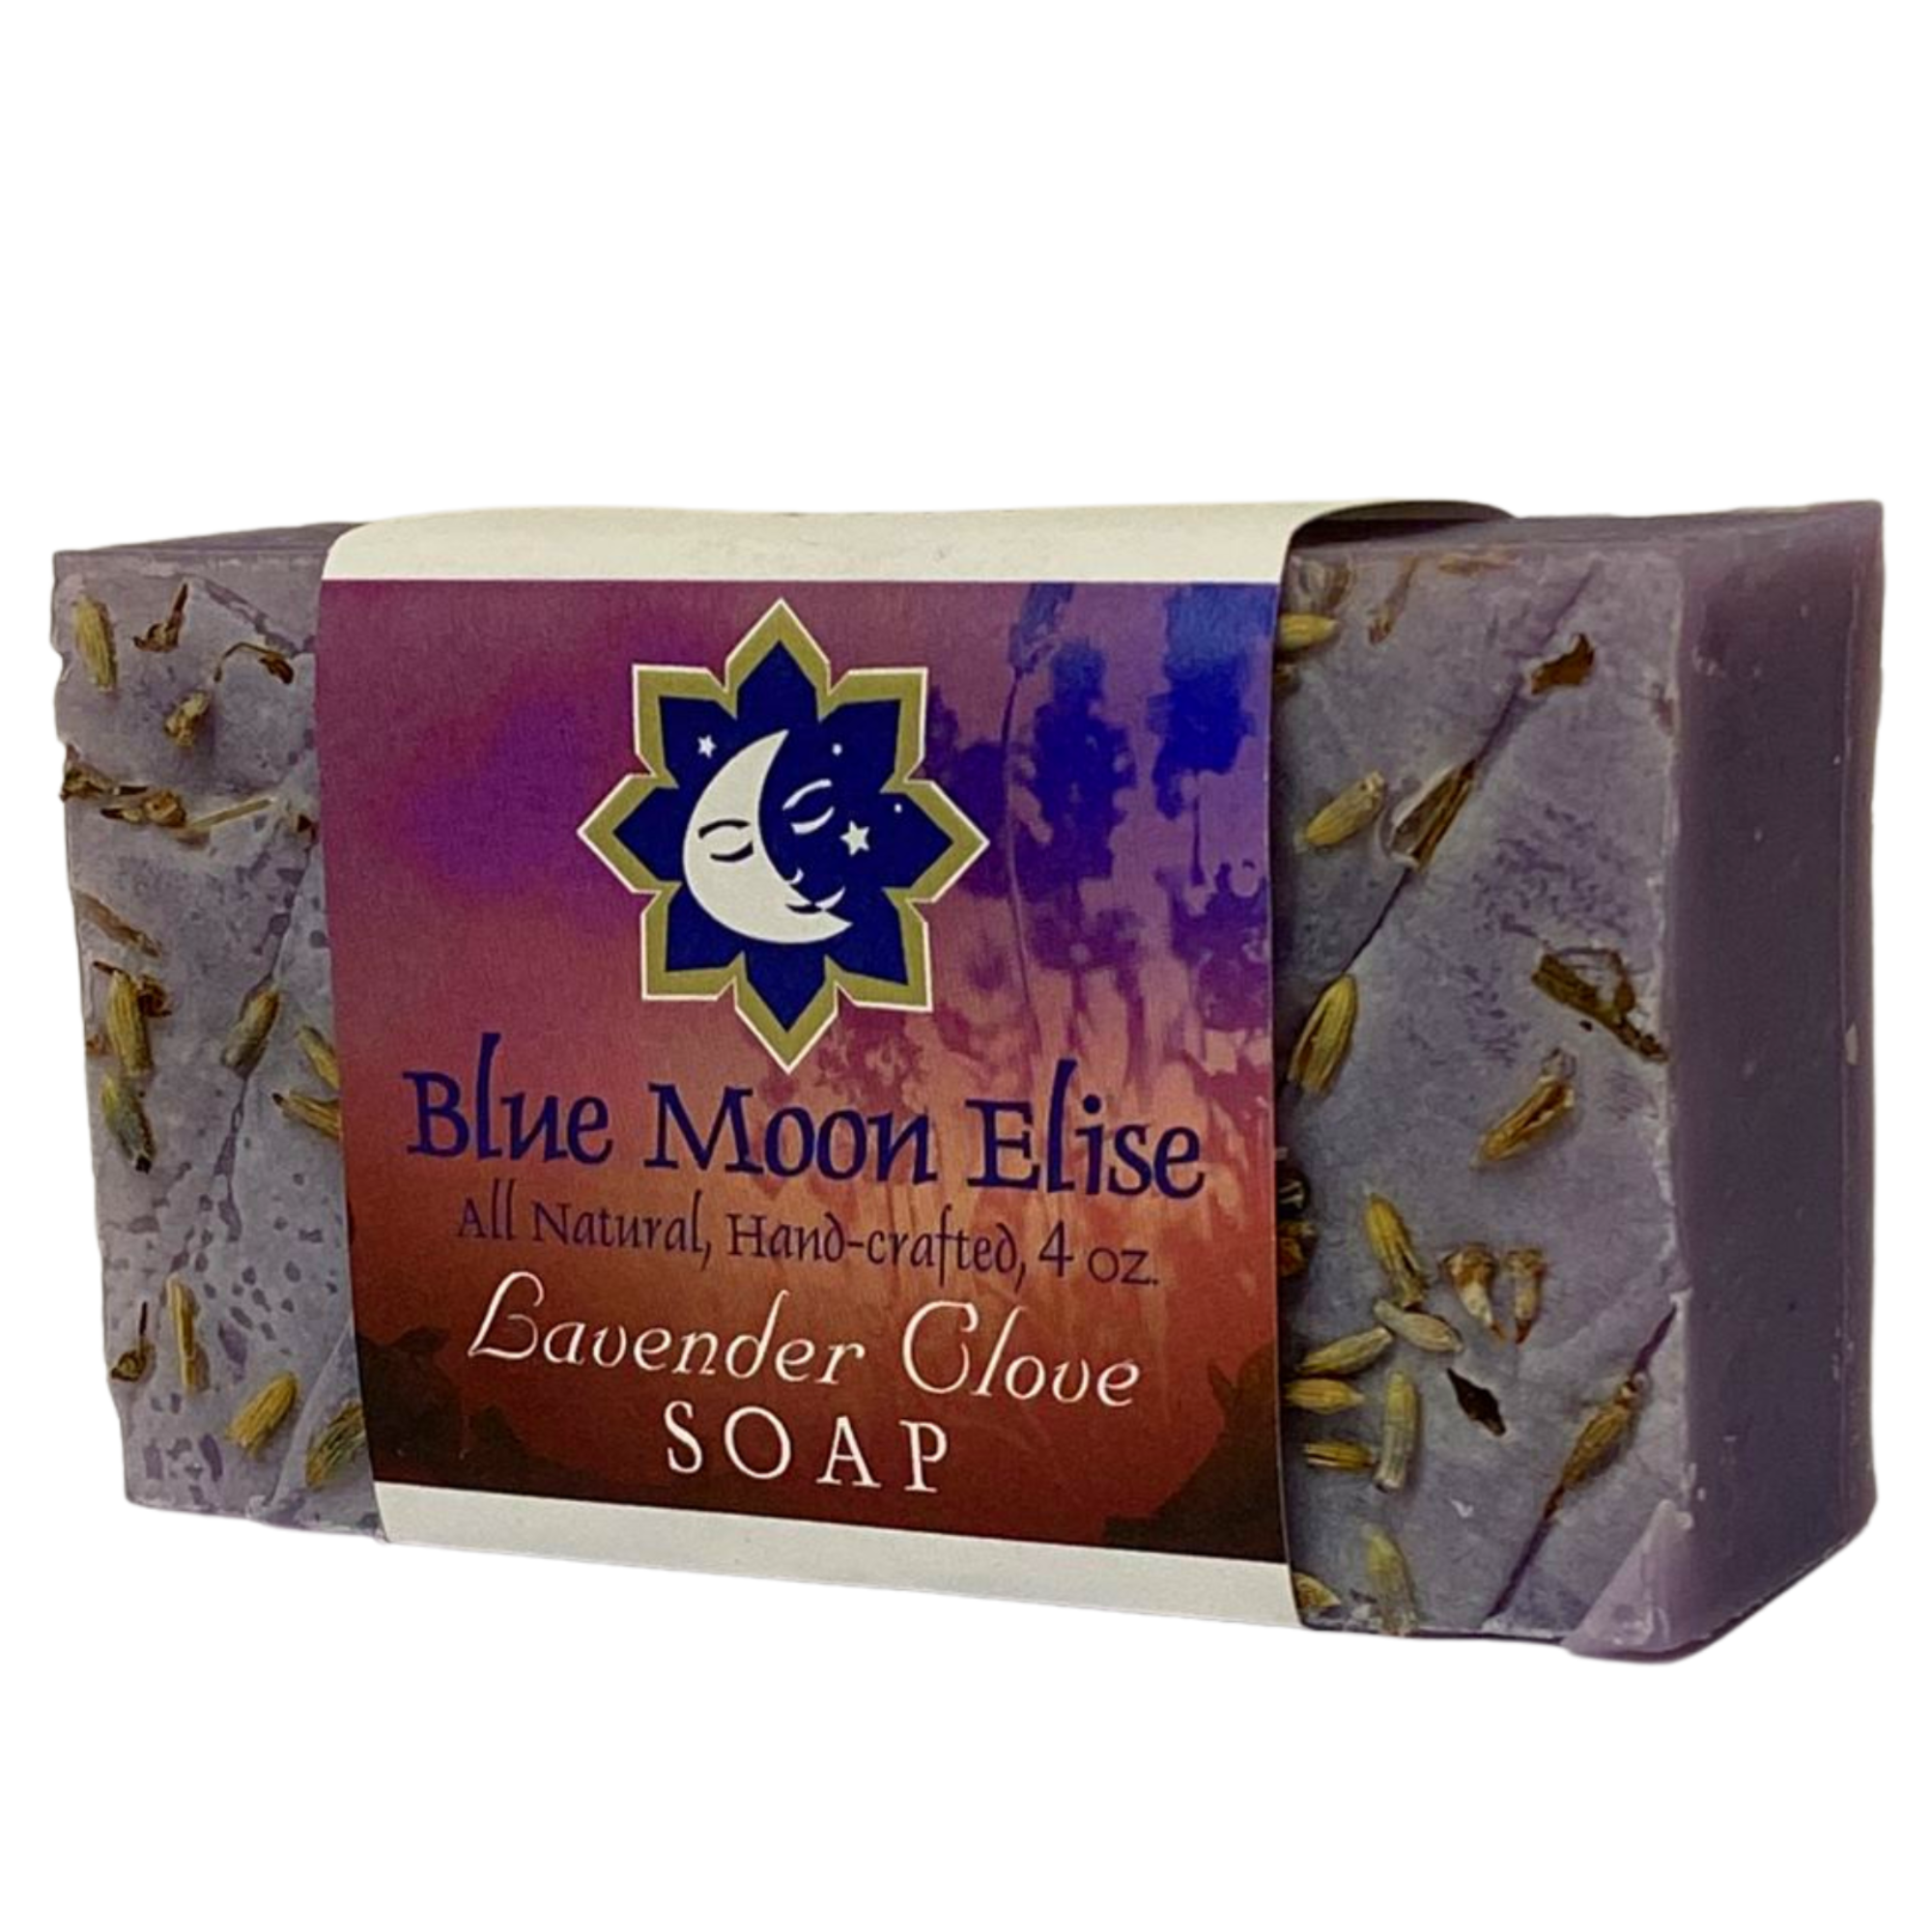 Lavender Clove Soap (Buy 1, Add 2 More for FREE)